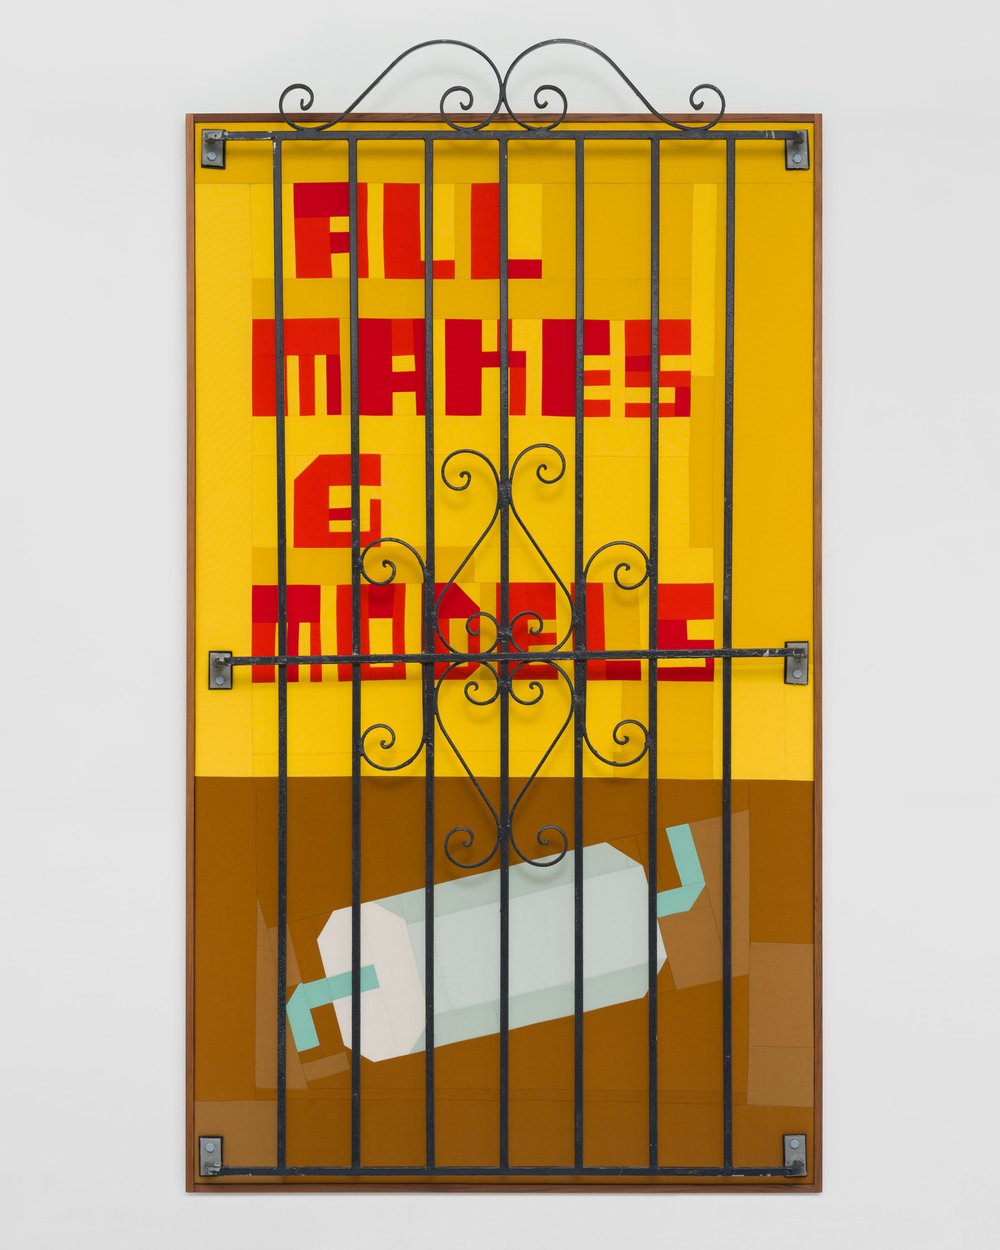   Jeffrey Sincich    All Makes &amp; Models 2   Cotton, cotton batting, plywood, found iron window grate, redwood  72 x 39.5 x 5 inches  2023  